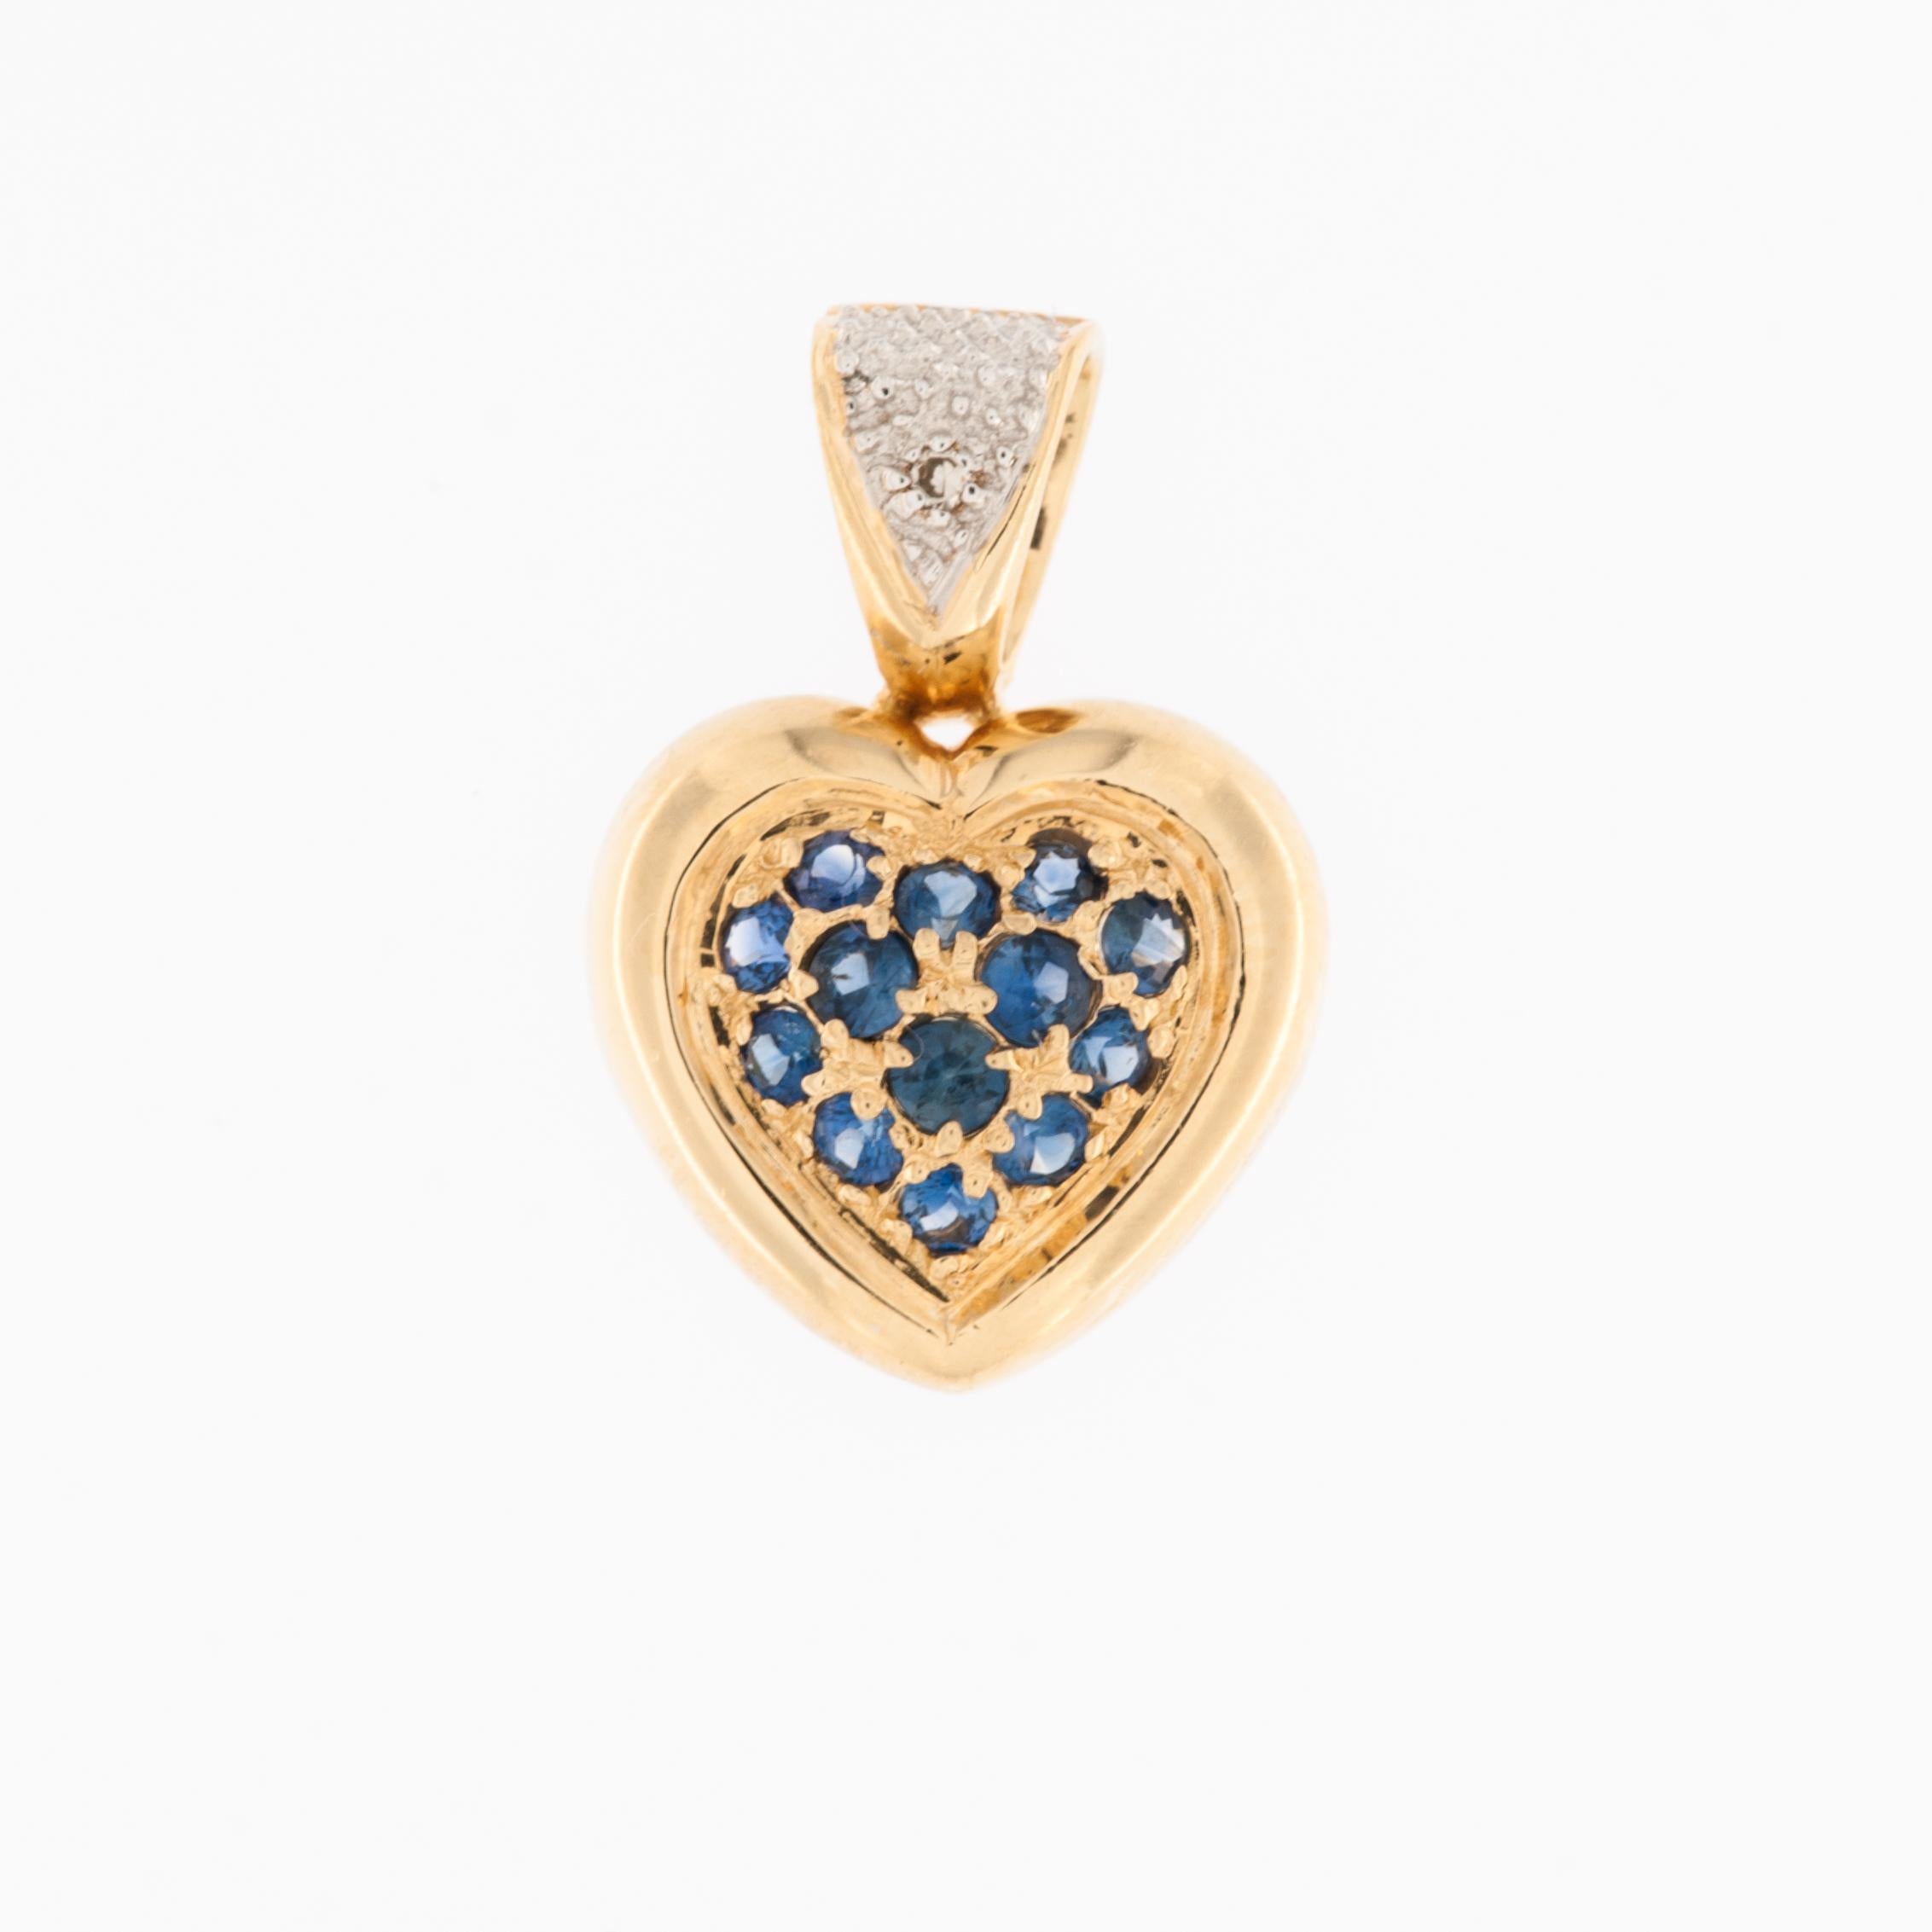 The Heart Pendant crafted in Yellow and White Gold is a radiant expression of elegance and sophistication. Fashioned in 18-karat gold, this pendant seamlessly blends the warm glow of yellow gold with the lustrous sheen of white gold, creating a